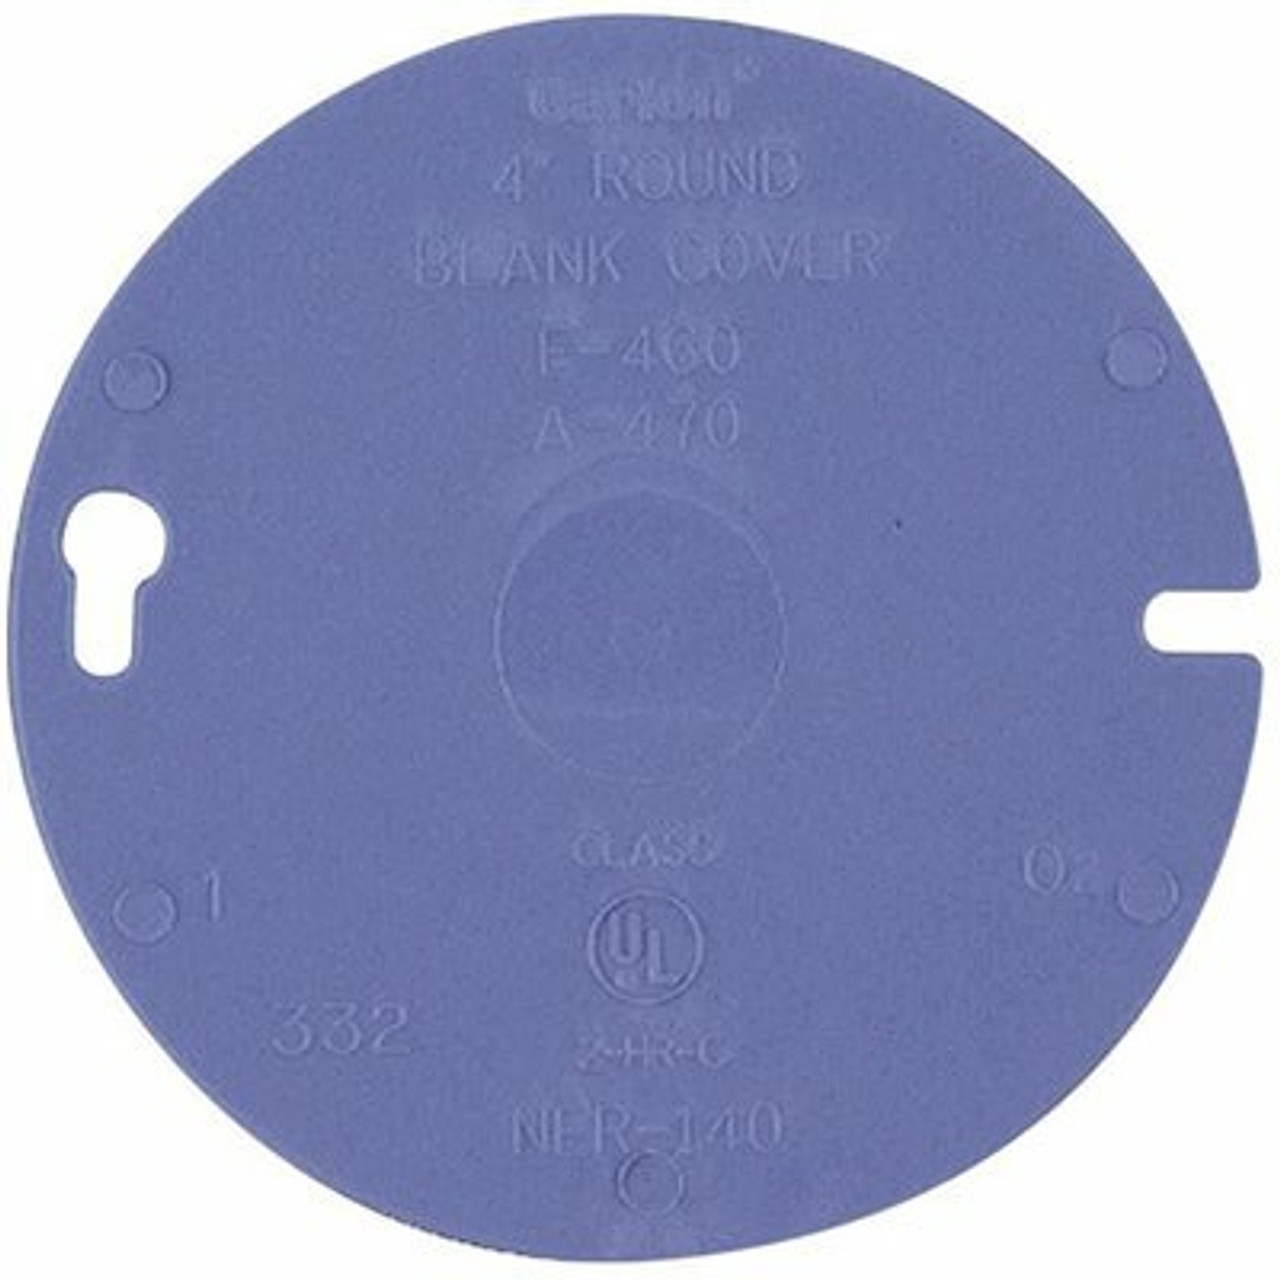 Carlon 4 In. Round Blank Pvc Electrical Box Cover